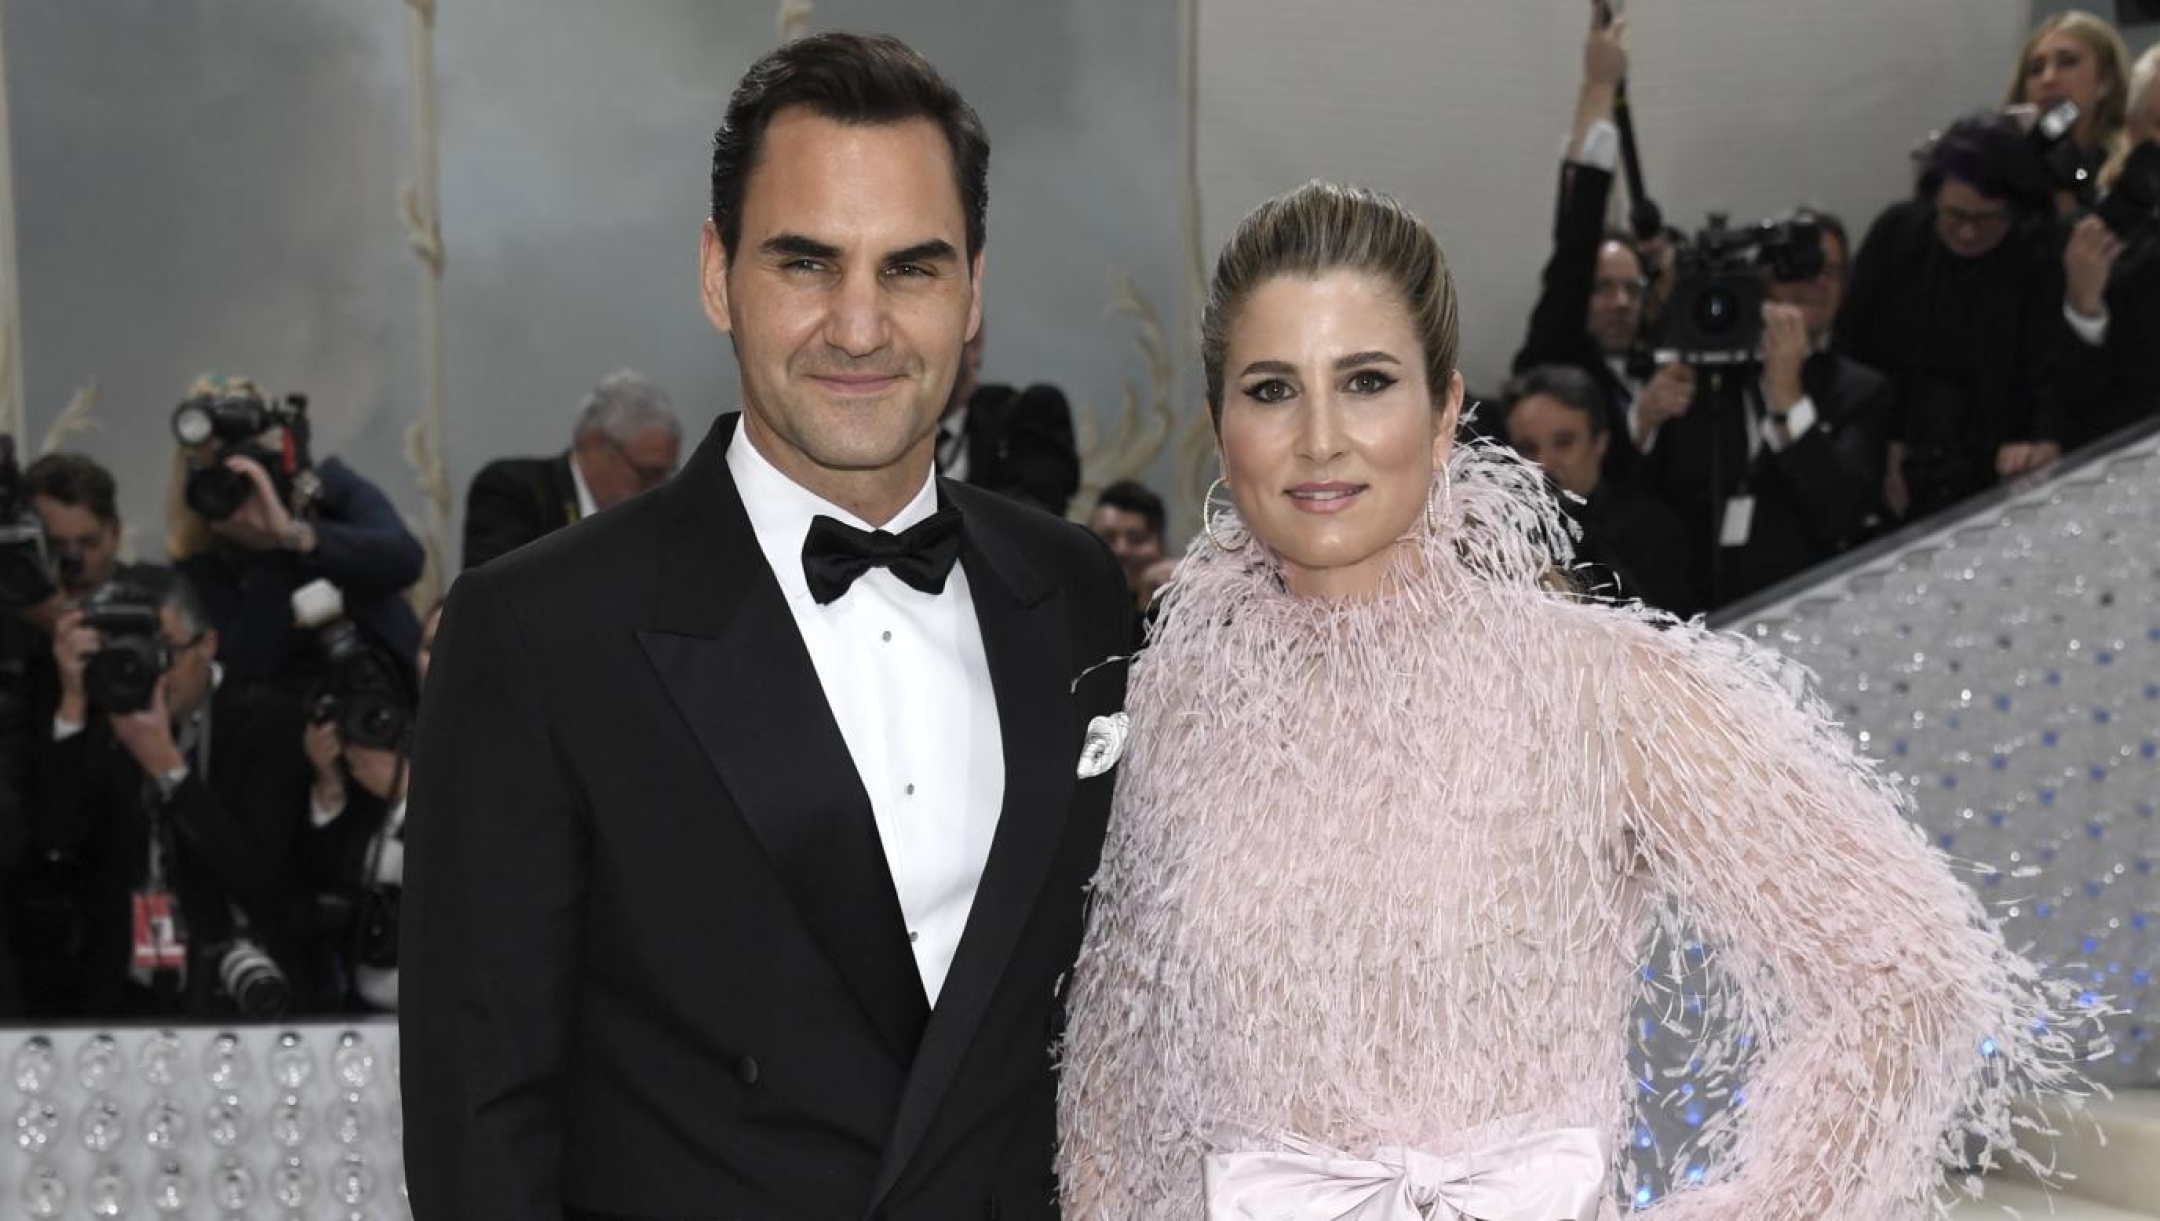 Roger Federer, left, and Mirka Federer attend The Metropolitan Museum of Art's Costume Institute benefit gala celebrating the opening of the "Karl Lagerfeld: A Line of Beauty" exhibition on Monday, May 1, 2023, in New York. (Photo by Evan Agostini/Invision/AP)